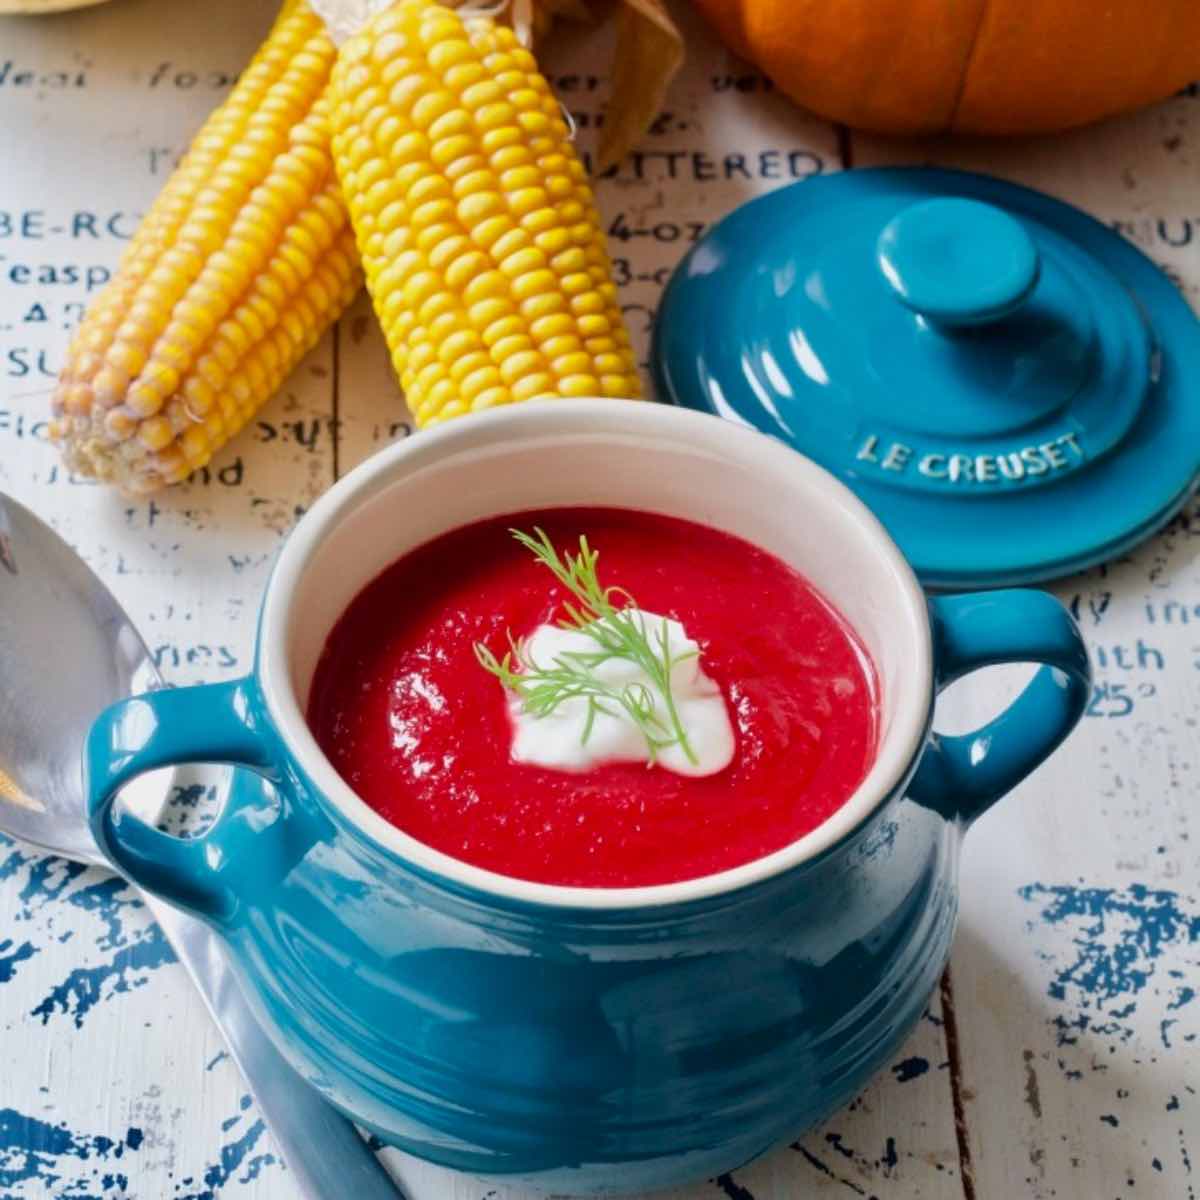 Beetroot soup in a bowl with decorative corn ears behind it.